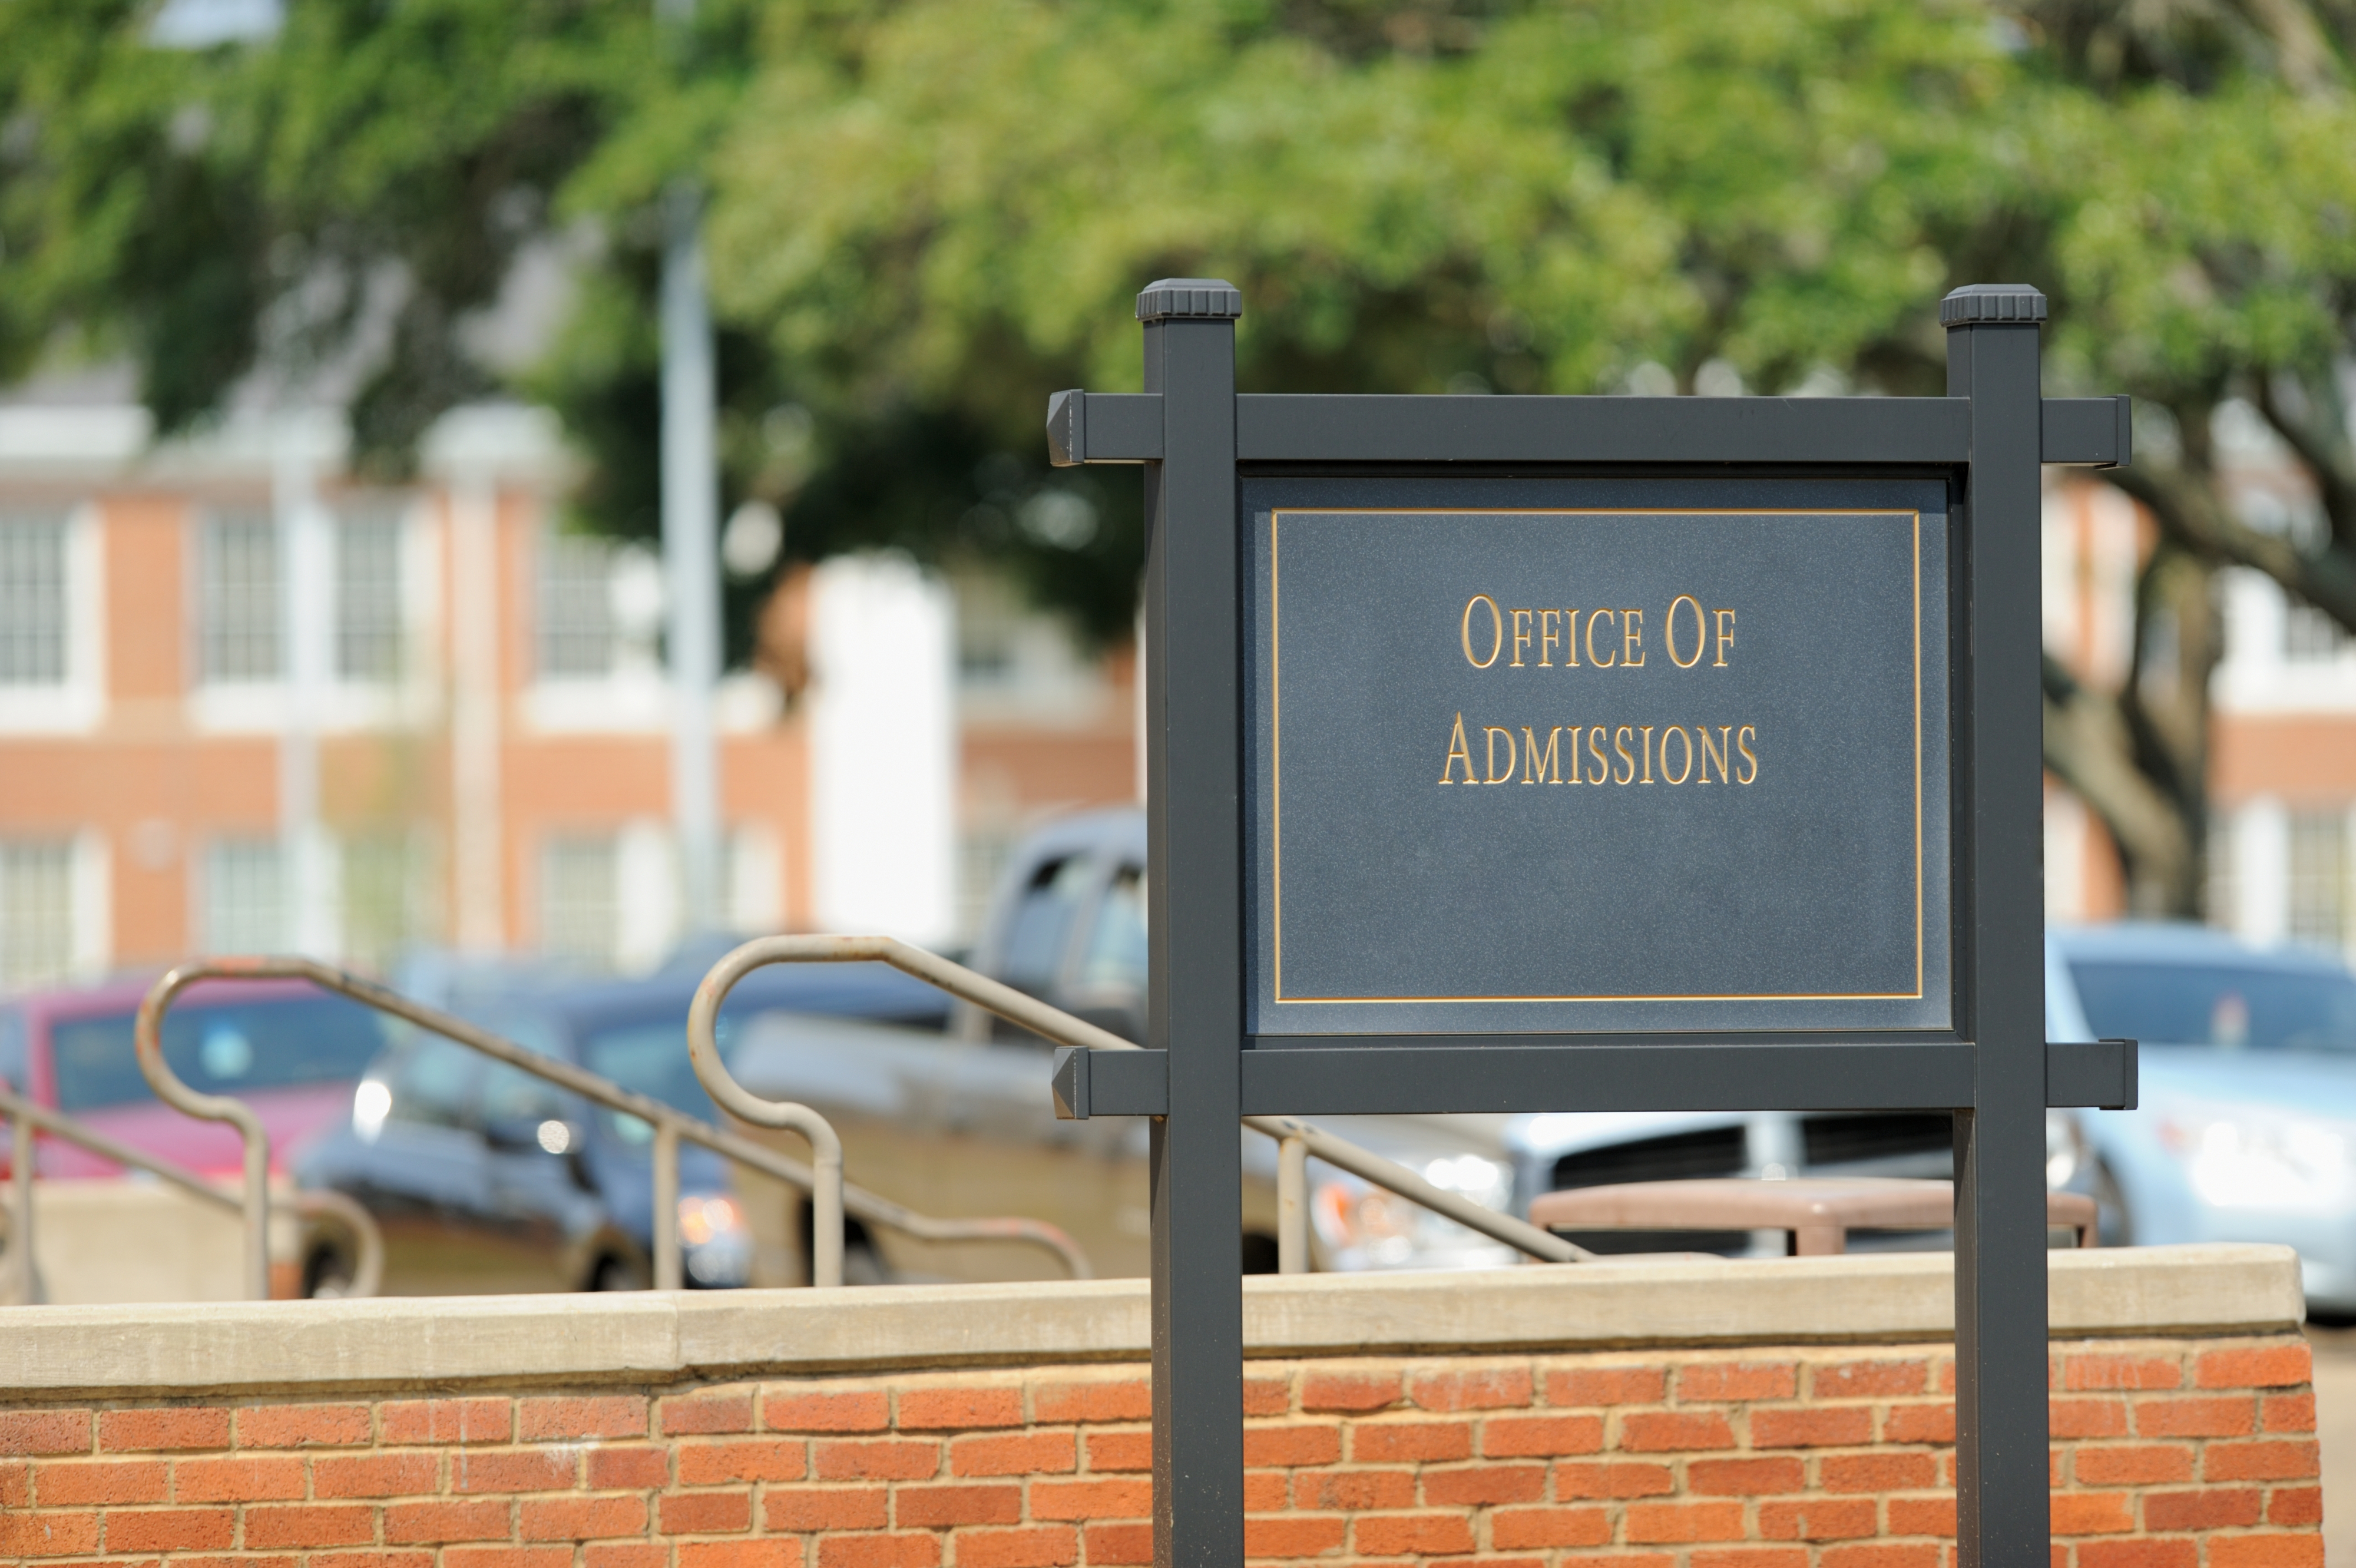 &quot;Office of admissions&quot; sign